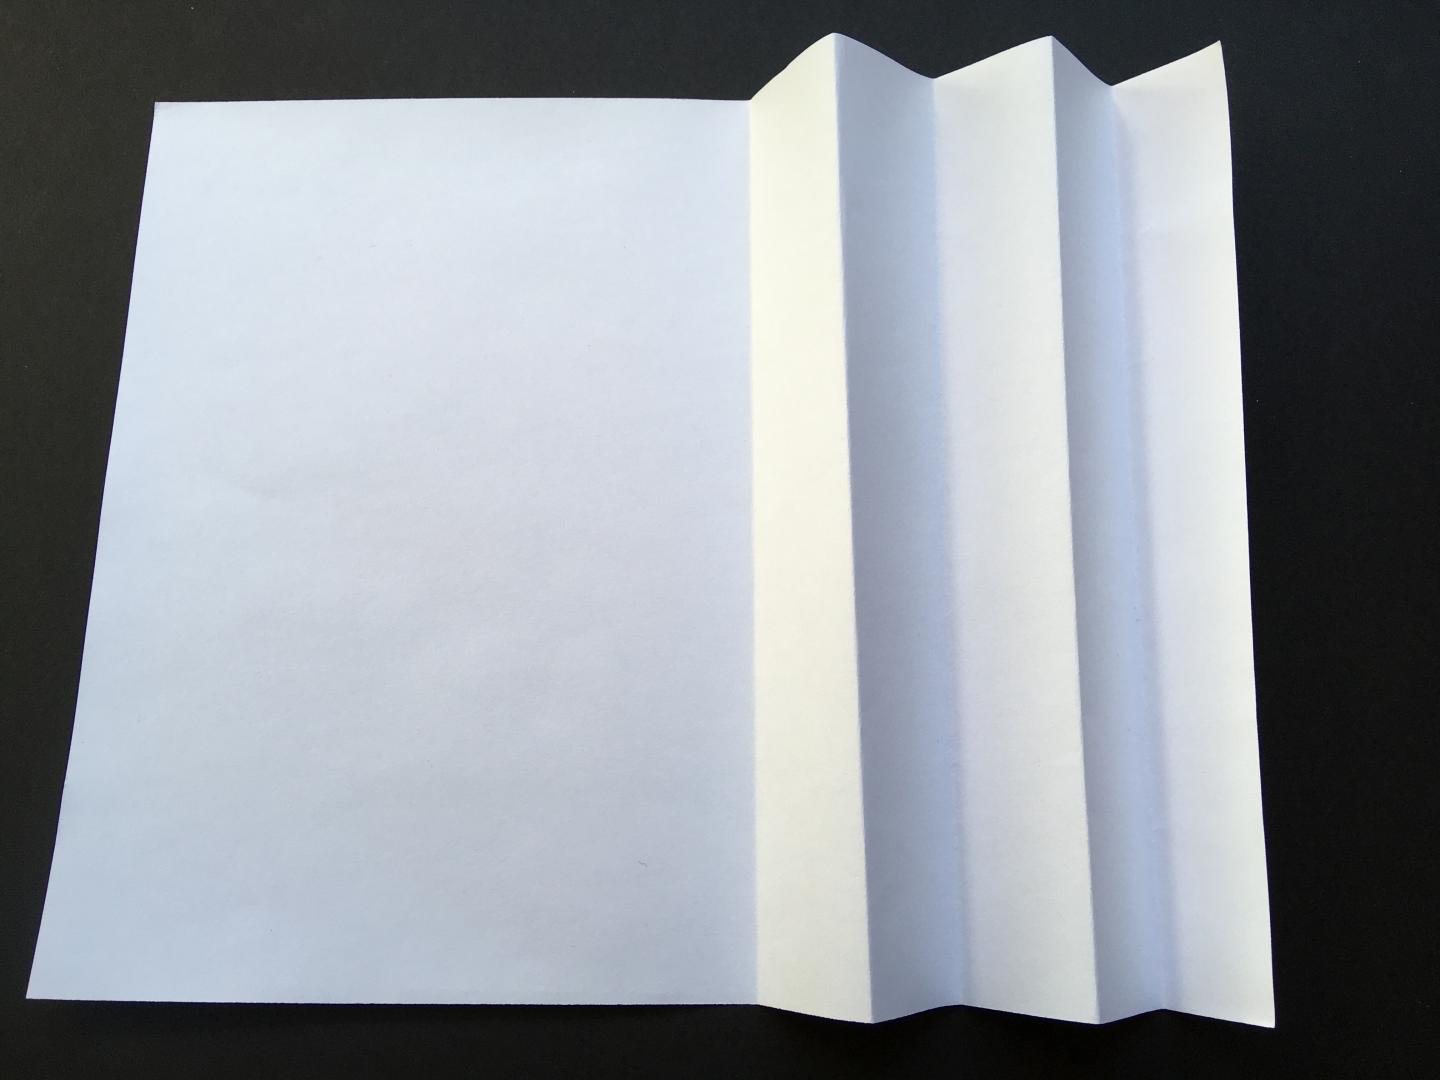 Pleat one piece of A4 paper